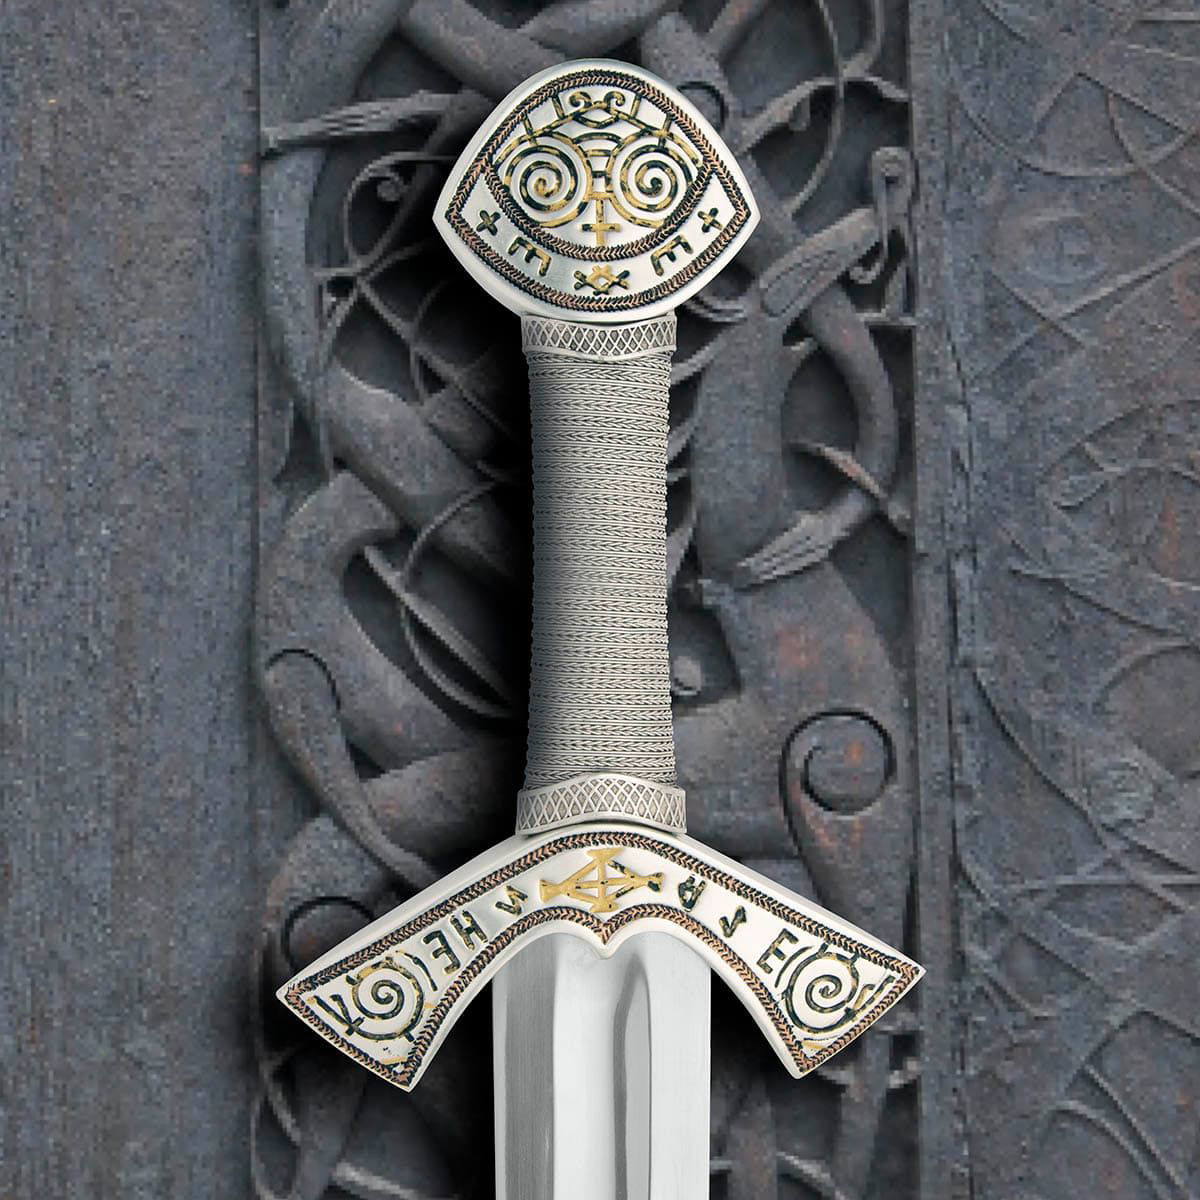 Langeid Sword replica by Windlass has silver-plated steel pommel and guard with real gold and copper markings